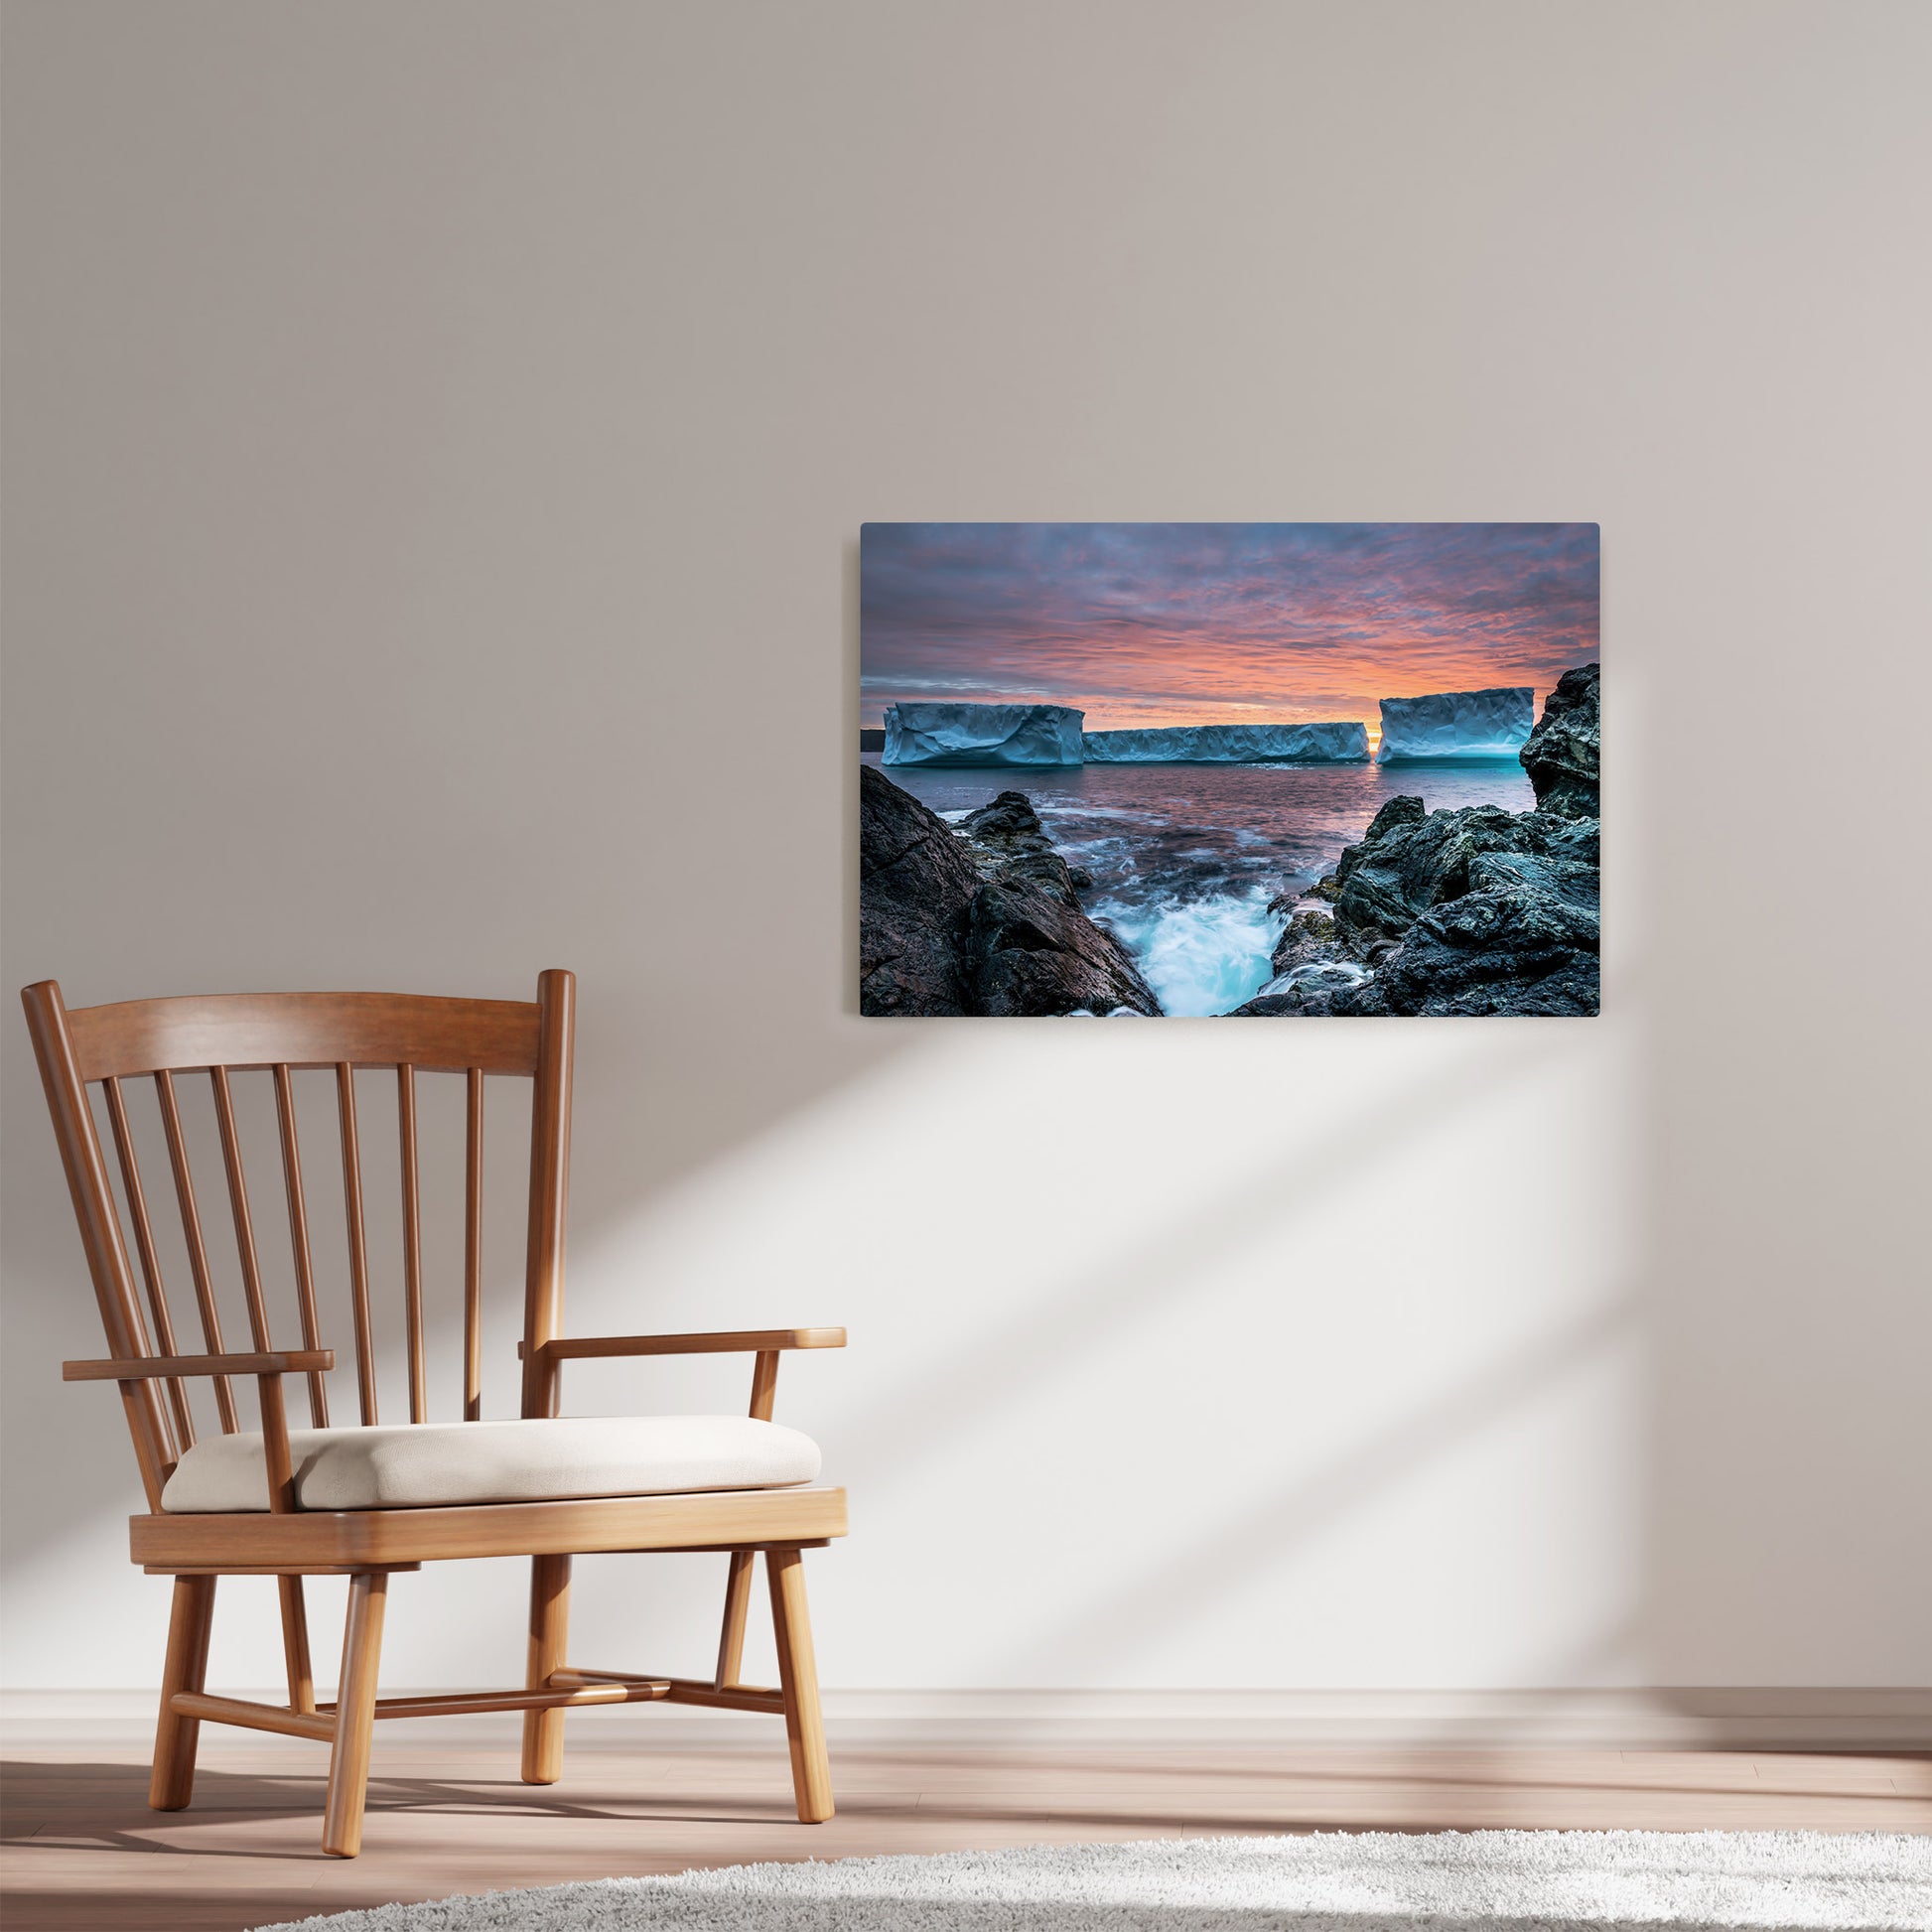 Ray Mackey's Brighton Berg Sunrise photography reproduced on HD metal print and displayed on wall